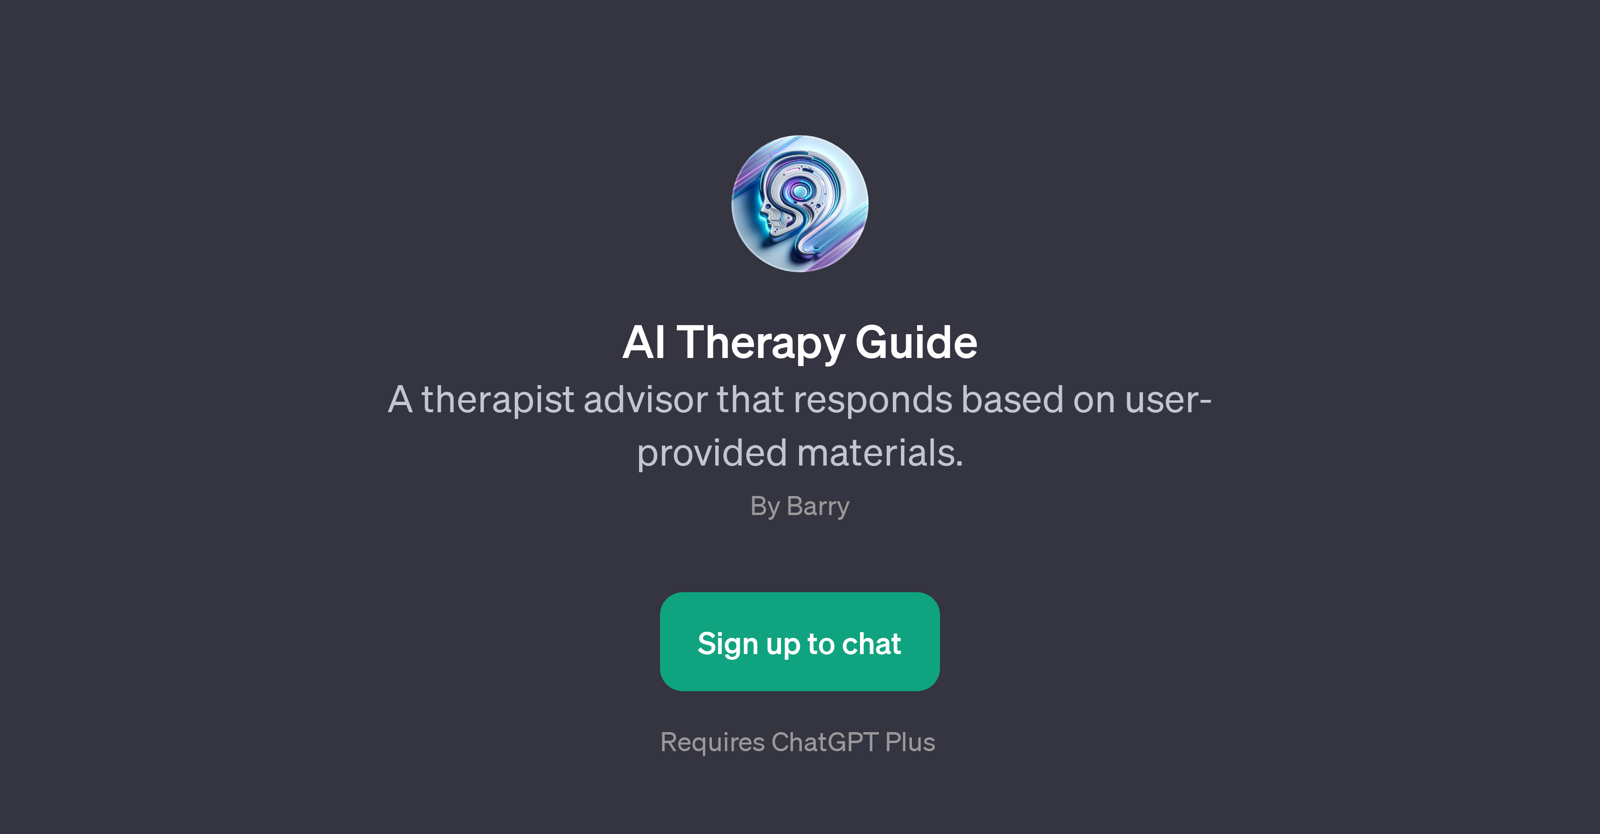 AI Therapy Guide website